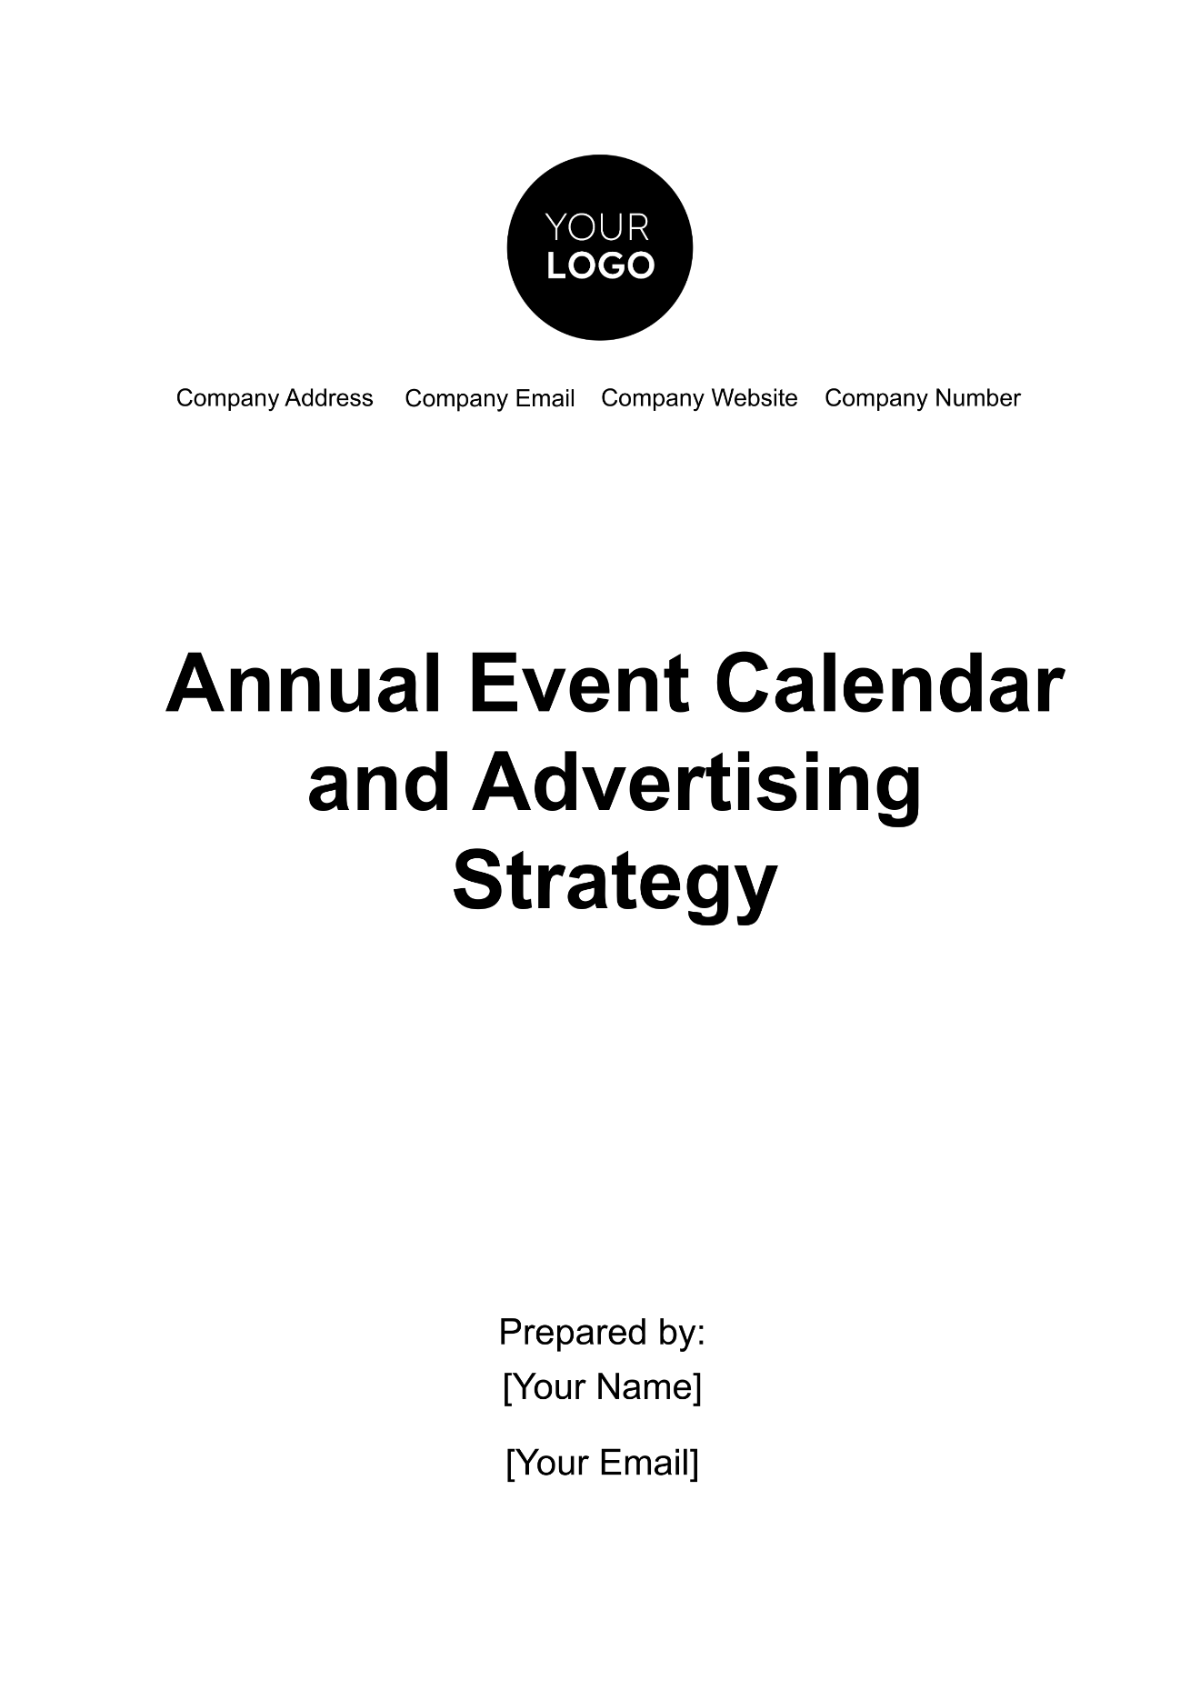 Free Annual Event Calendar and Advertising Strategy Template